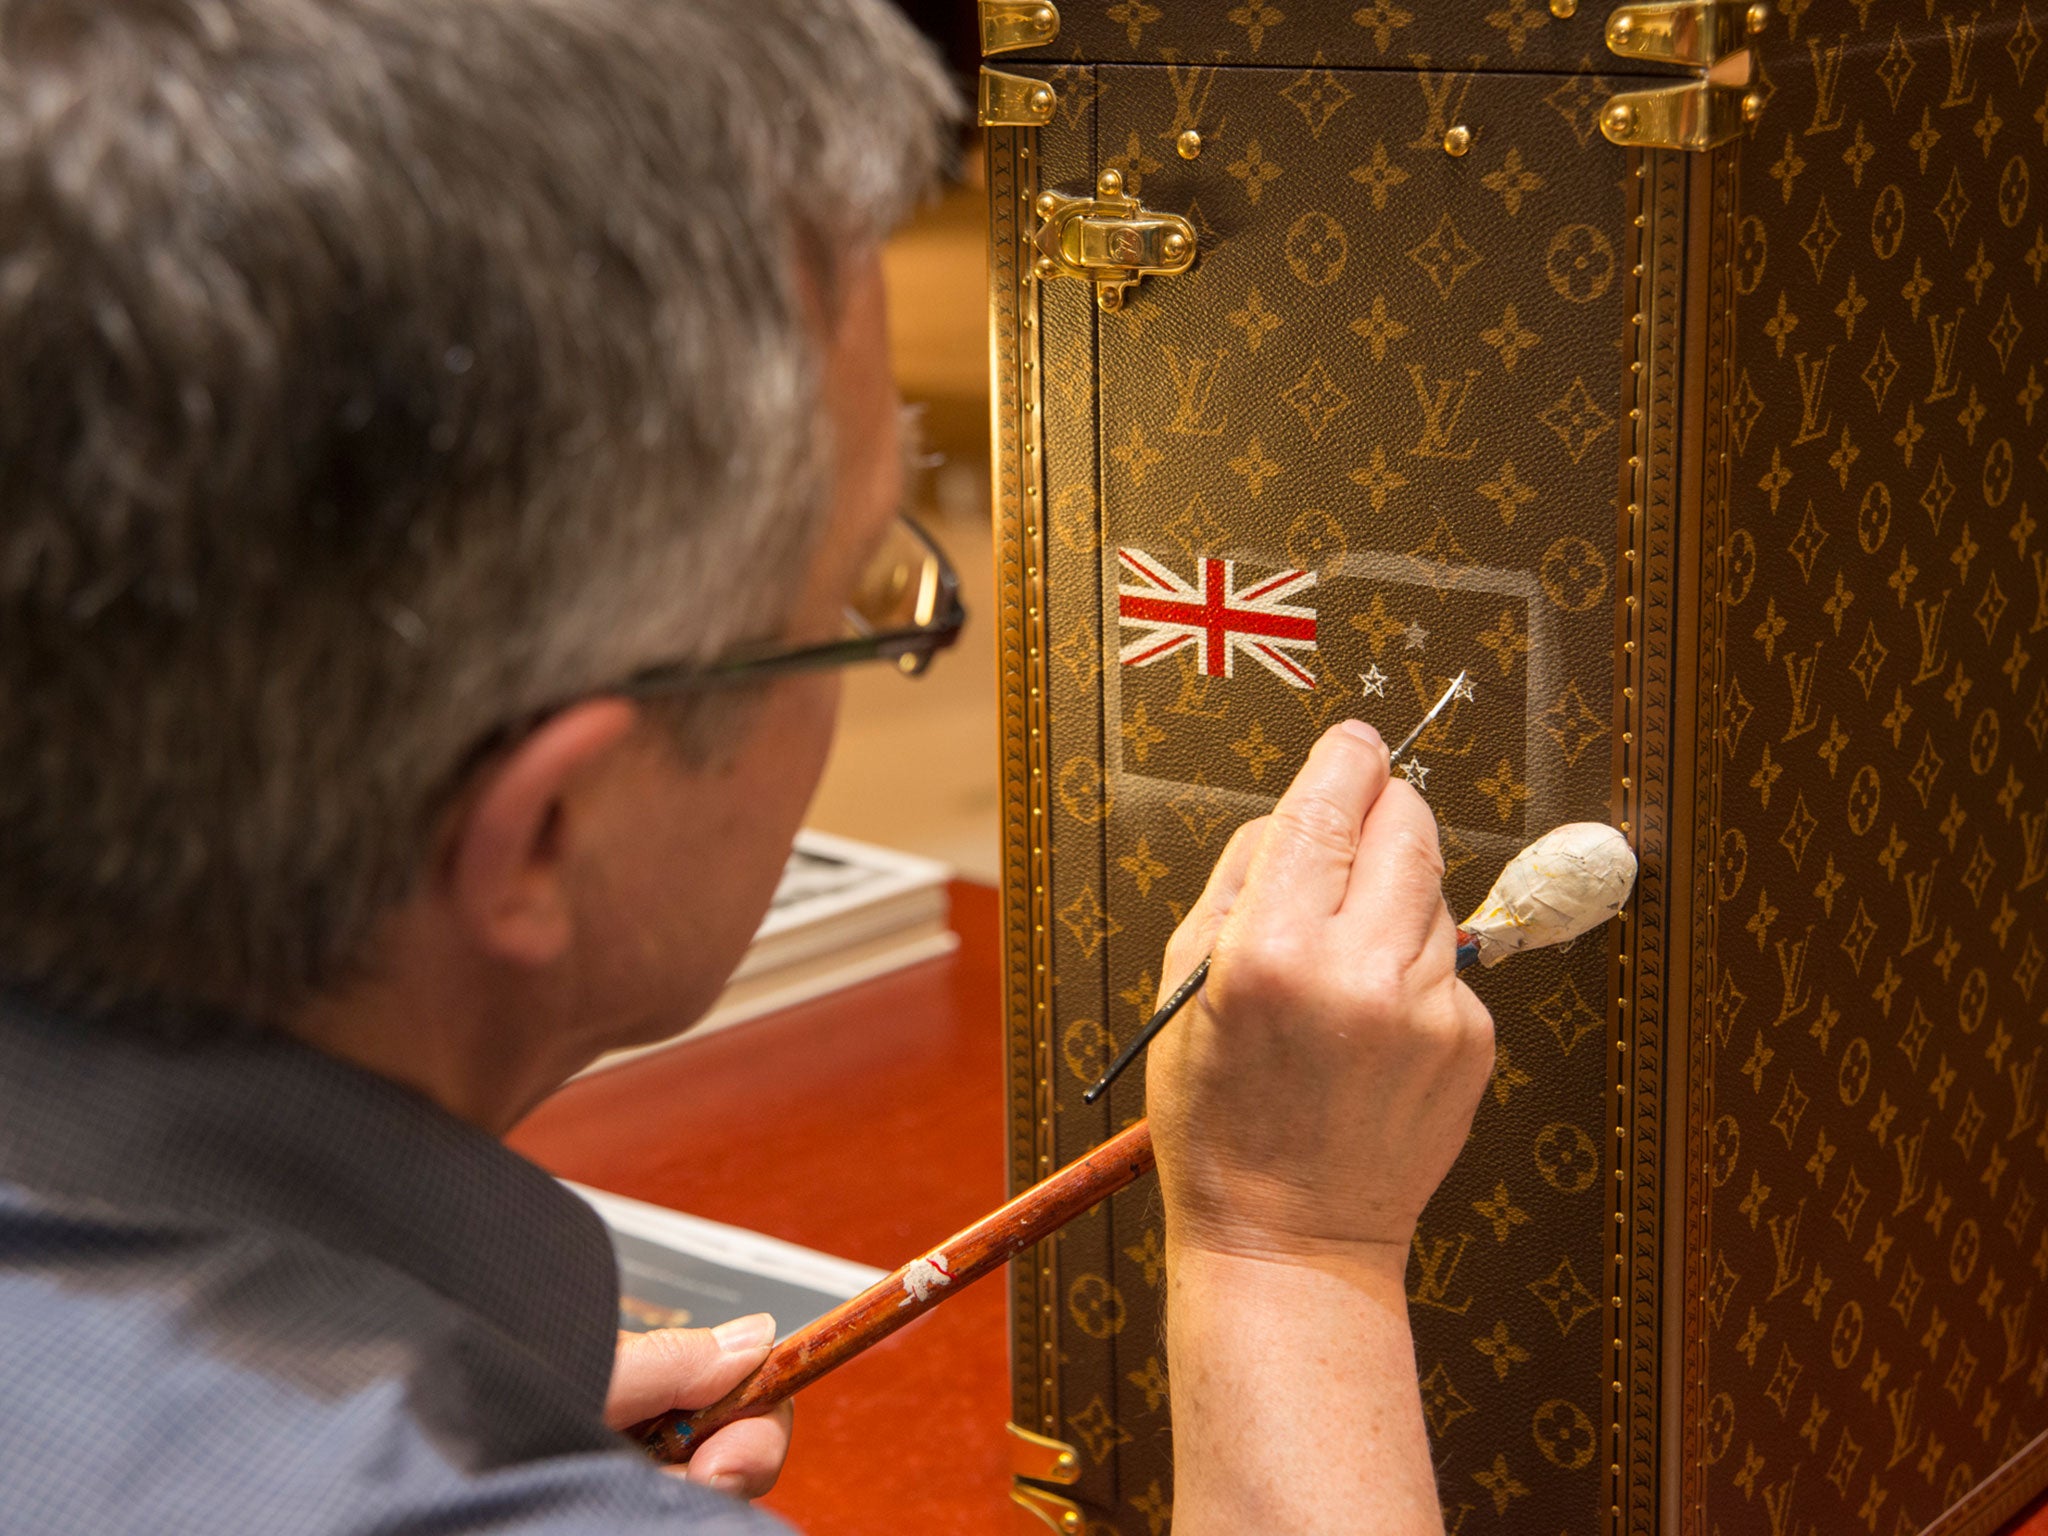 &#13;
The flags of the finalists are painted onto the Louis Vuitton case that will transport the trophy&#13;